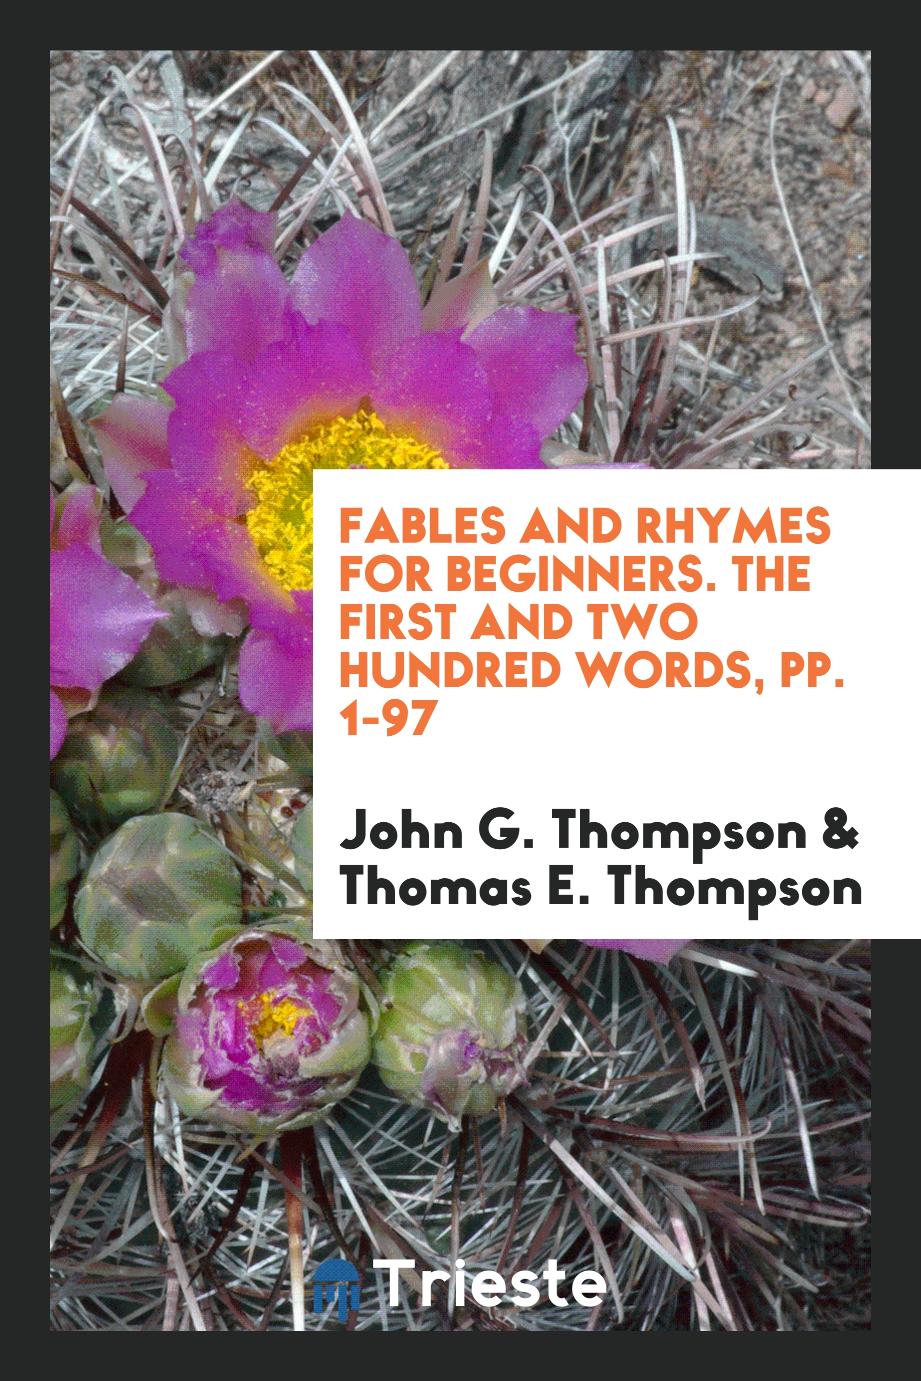 Fables and Rhymes for Beginners. The first and two Hundred Words, pp. 1-97